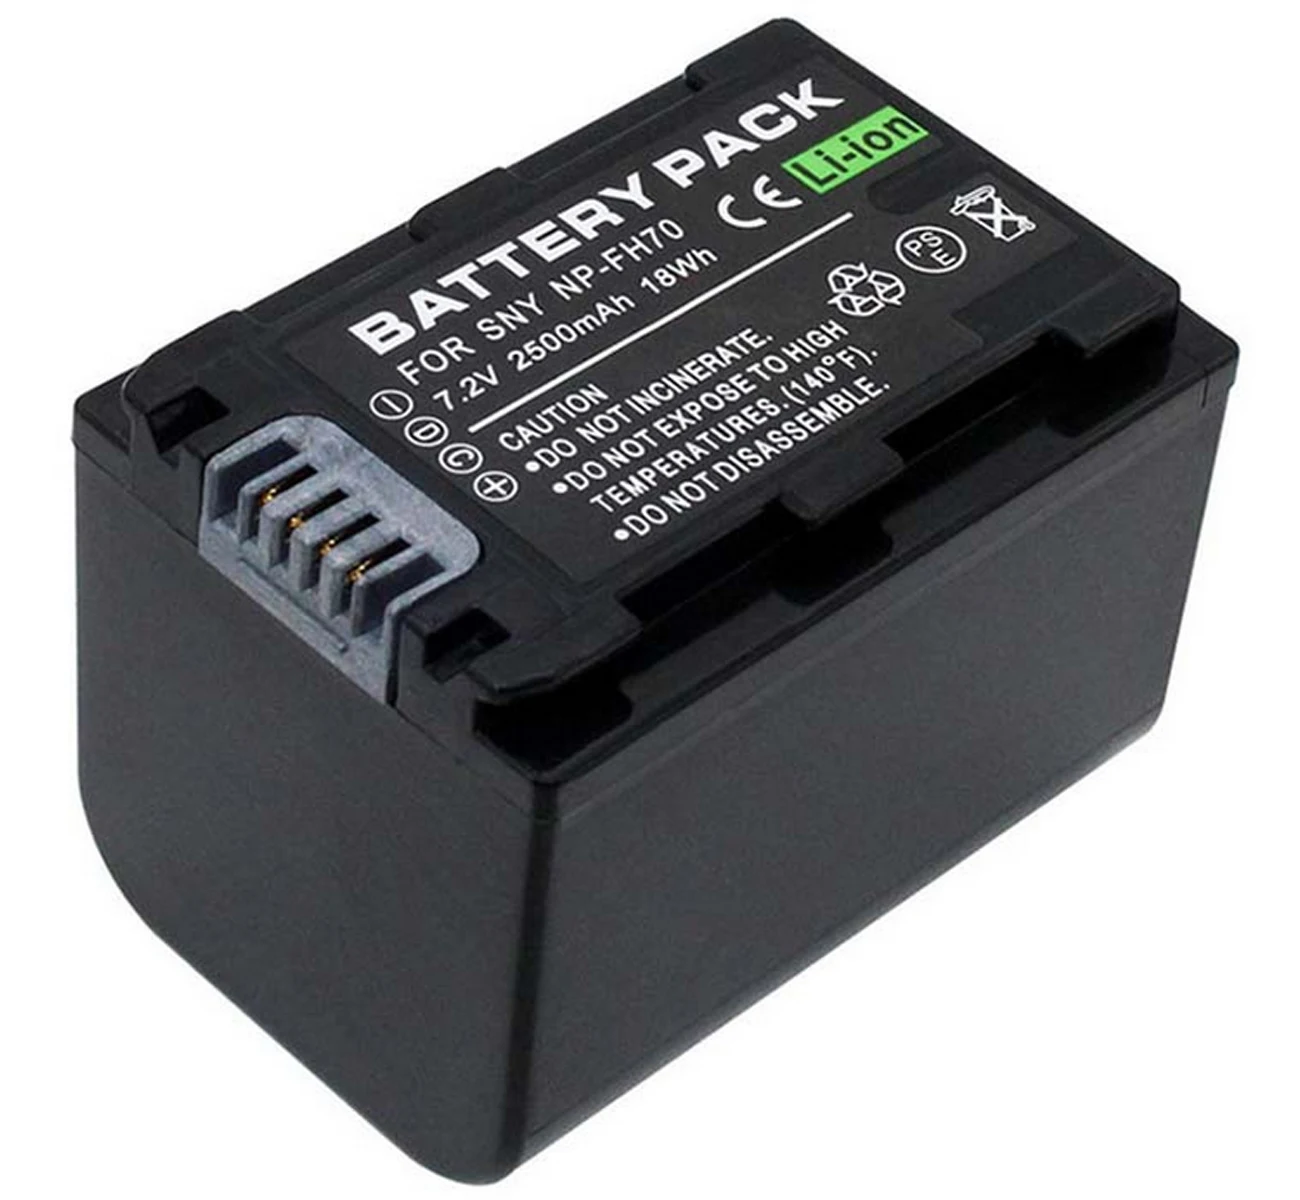 

Battery Pack for Sony HDR-XR100E, HDR-XR105E, HDR-XR106E, HDR-XR200E, HDR-XR200VE, HDR-XR500VE, HDR-XR520VE Handycam Camcorder